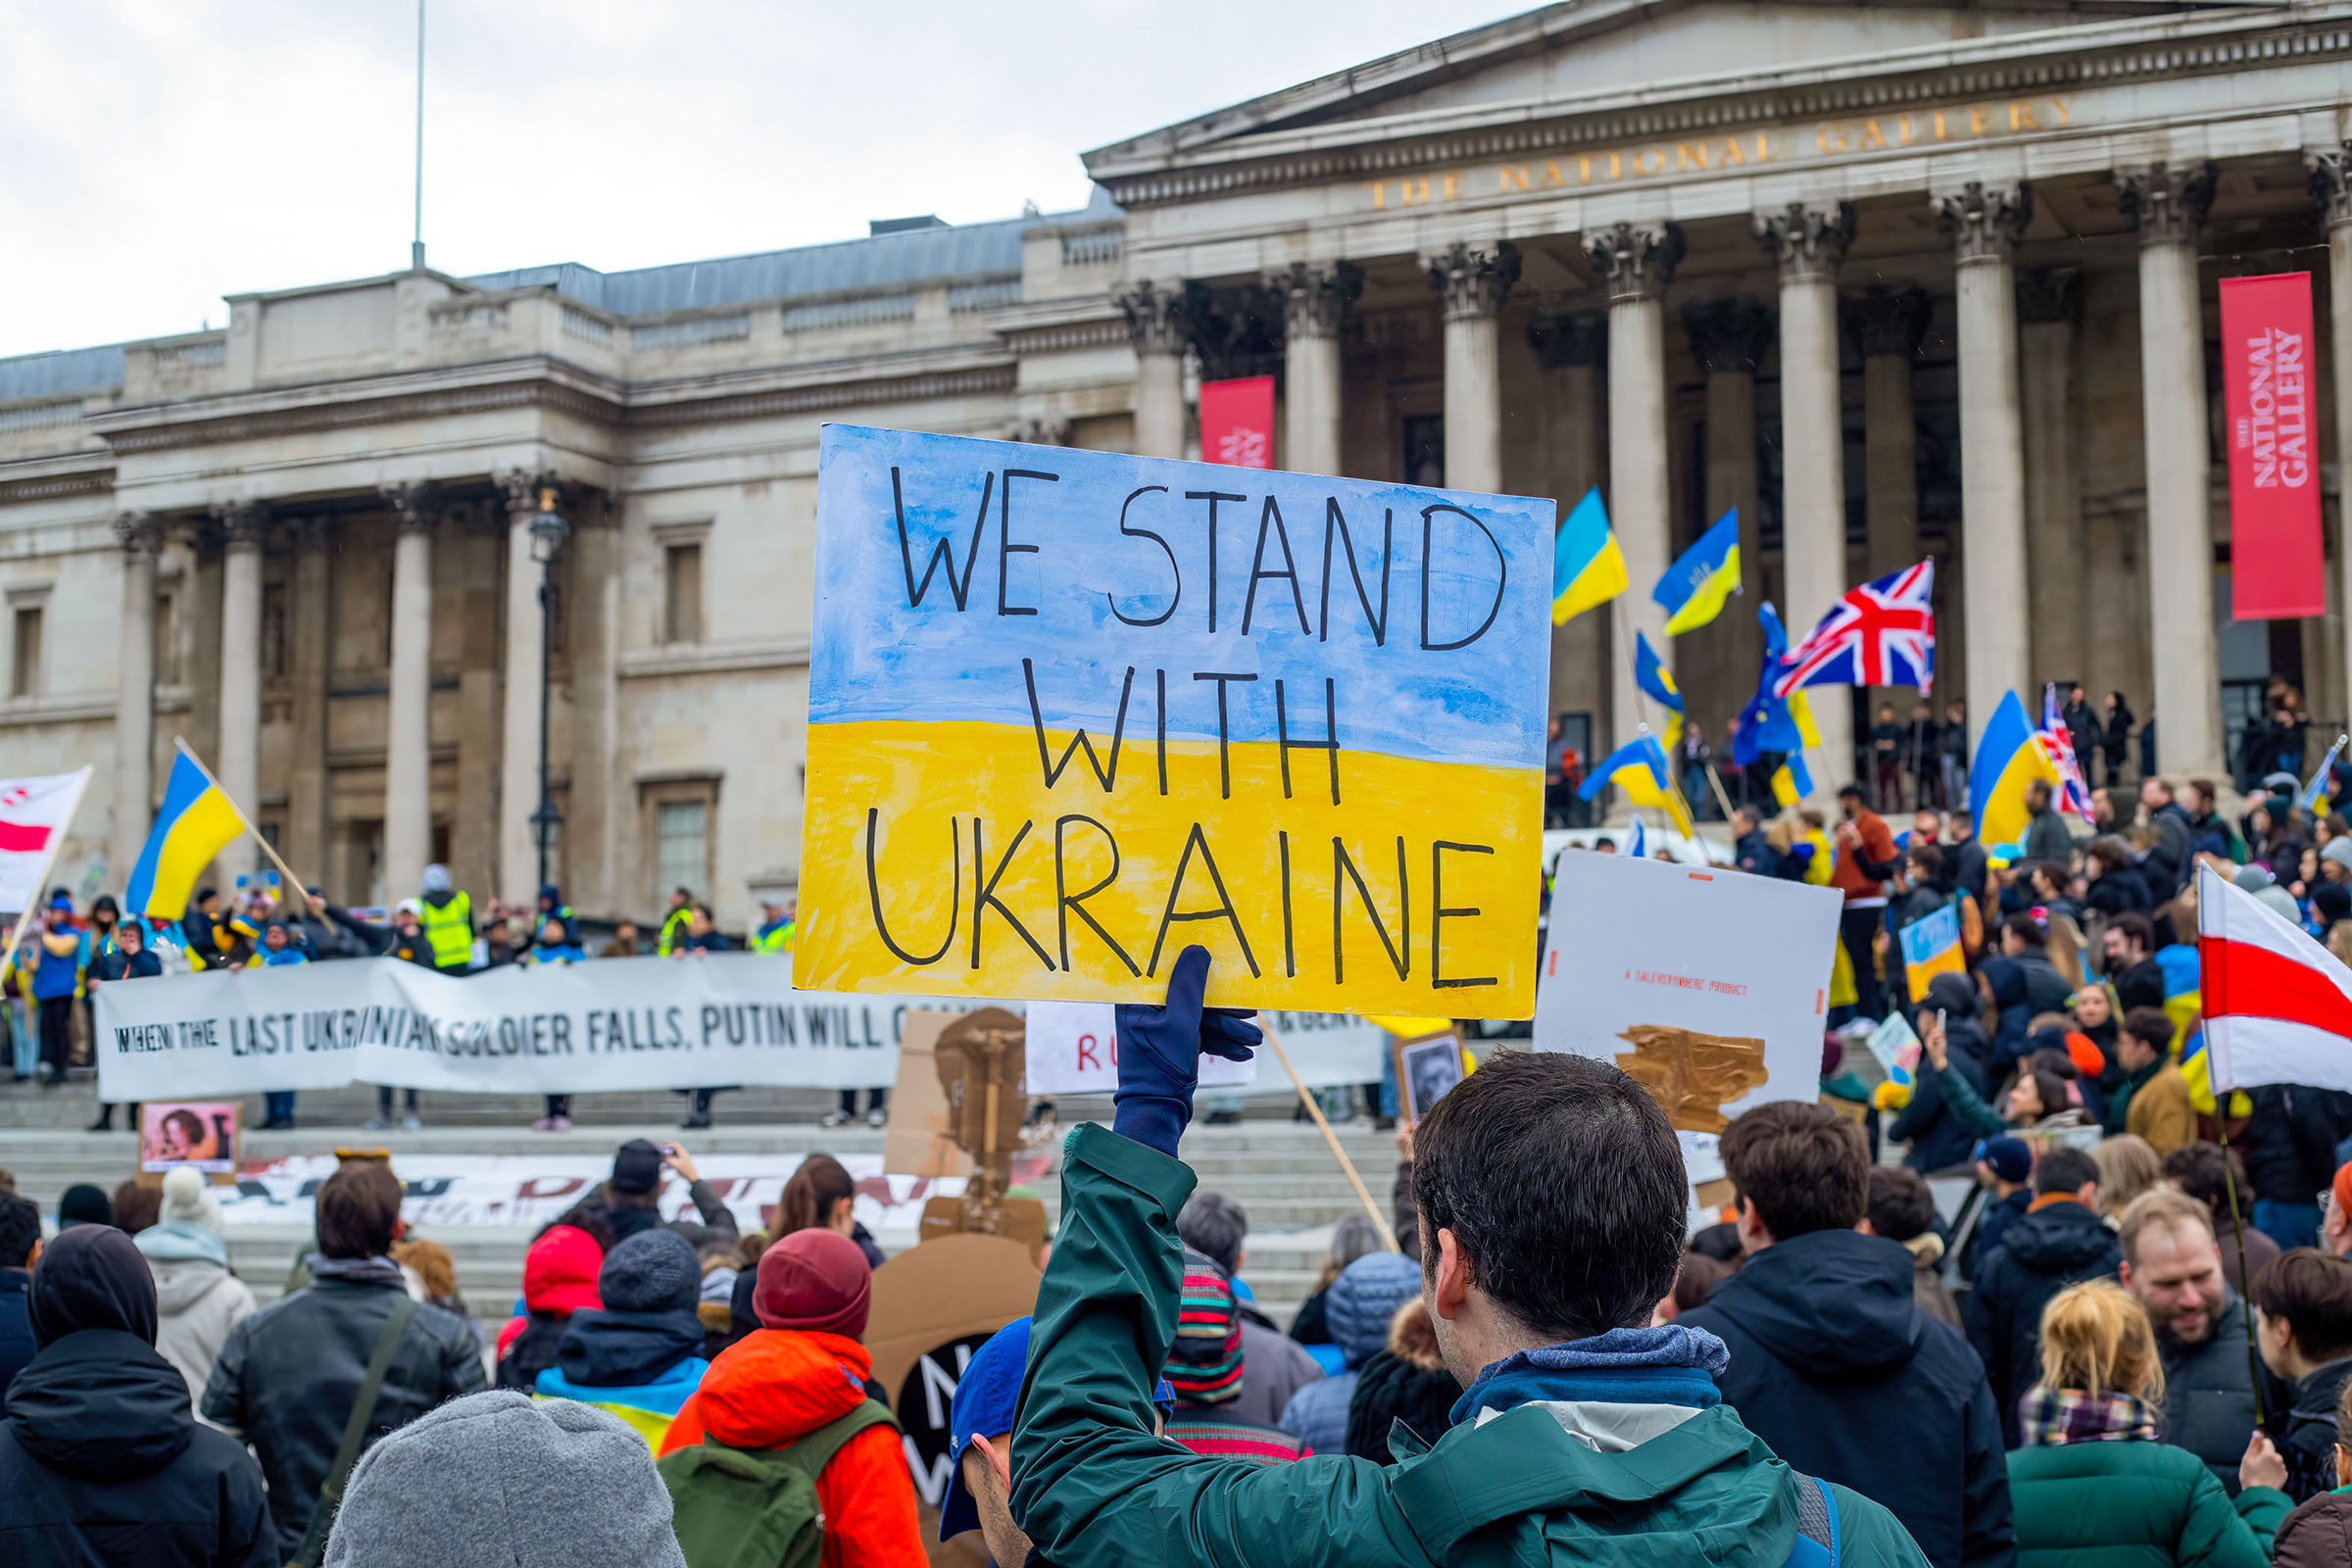 A demonstrator holds a sign saying "We Stand With Ukraine" on March 5, 2022 during a protest against Russia's invasion of Ukraine at Trafalgar Square in London. (Lucy North—SOPA Images/LightRocket/Getty Images)